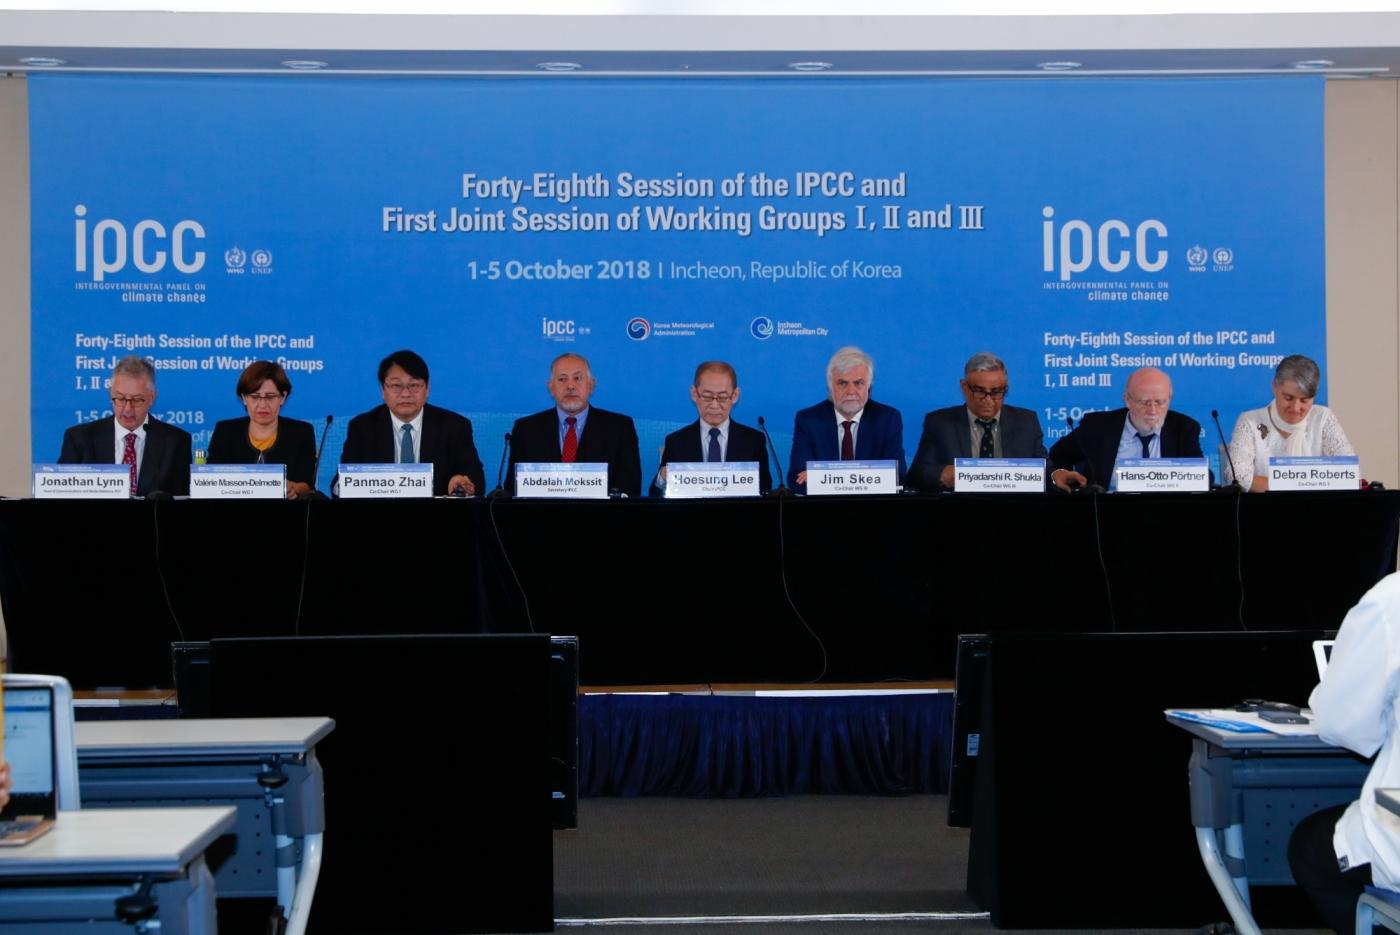 INCHEON, Oct. 8, 2018 (Xinhua) -- A press conference of the 48th seesion of the Intergovernmental Panel on Climate Change (IPCC) is held in South Korea's western port city of Incheon, Oct. 8, 2018. The IPCC, an international body assessing the science related to climate change, on Monday urged "rapid and far-reaching" changes in all aspects of the entire world to fight against global warming after adopting a special report on global warming. (Xinhua/Wang Jingqiang/IANS) by .